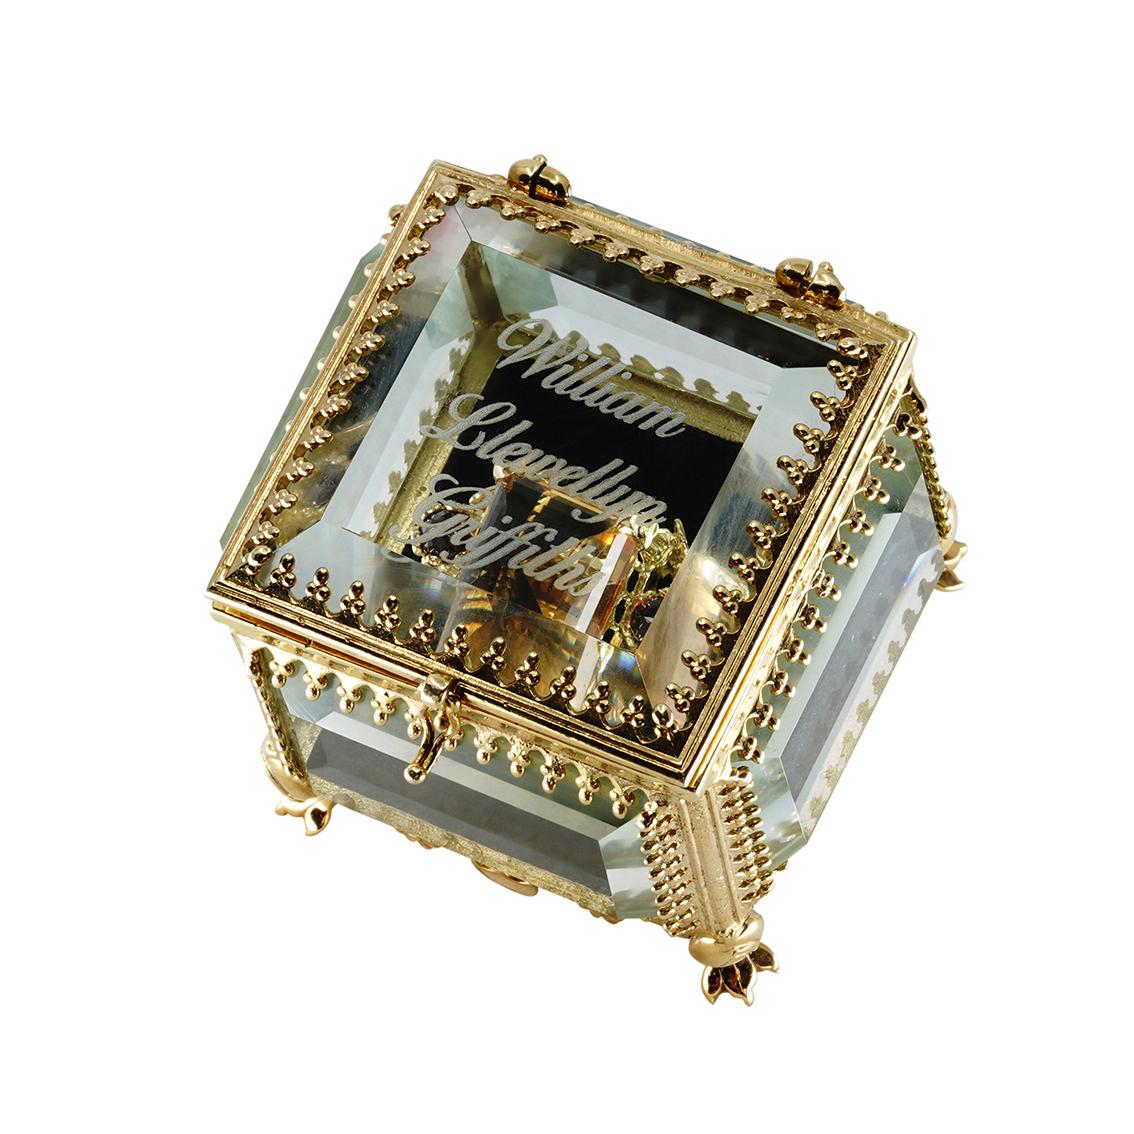 Catacomb Saints Poison Chamber Ring in 18 Karat Gold with Citrine and Garnets 5